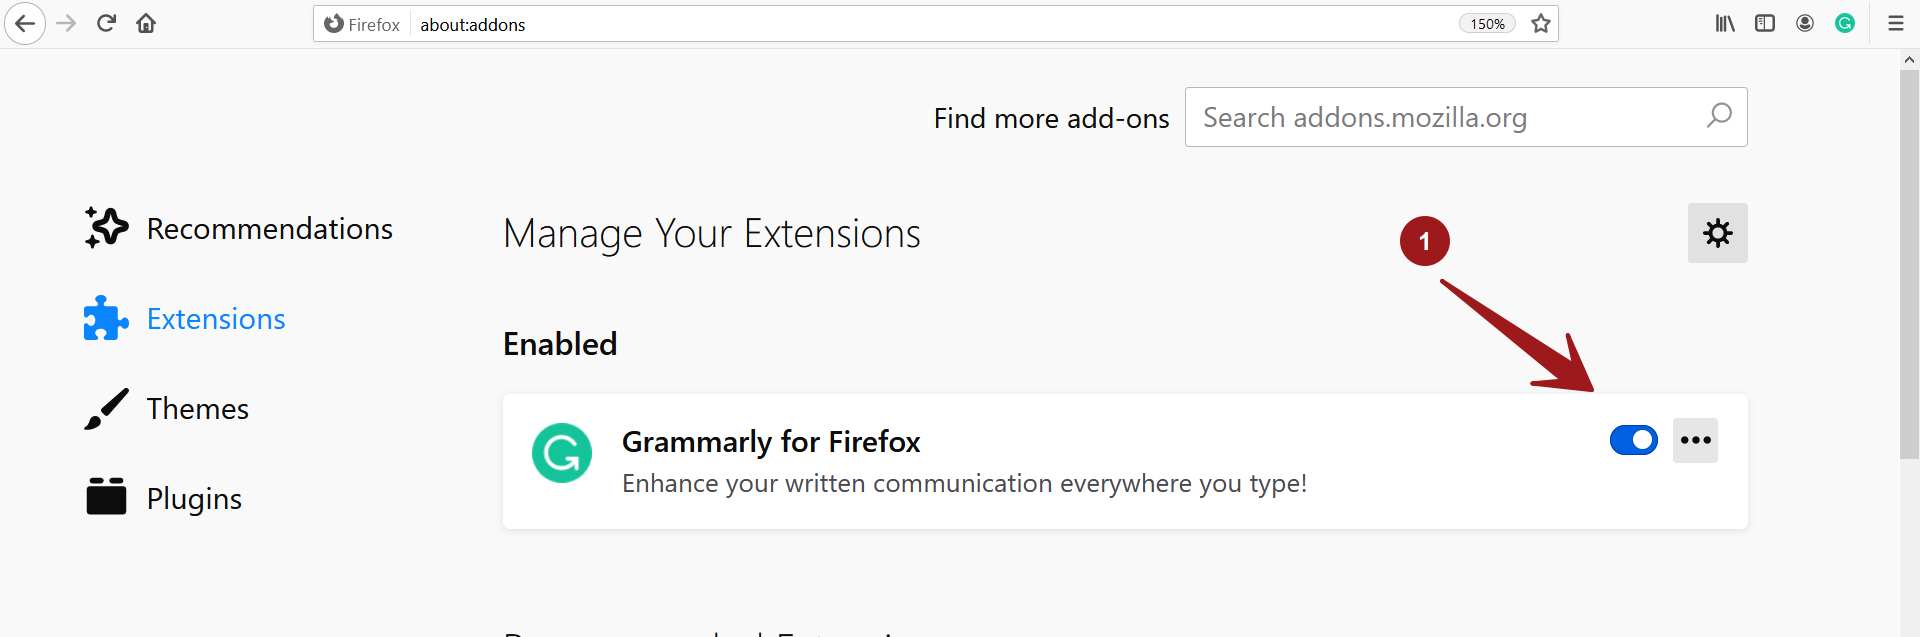 Grammarly for Firefox